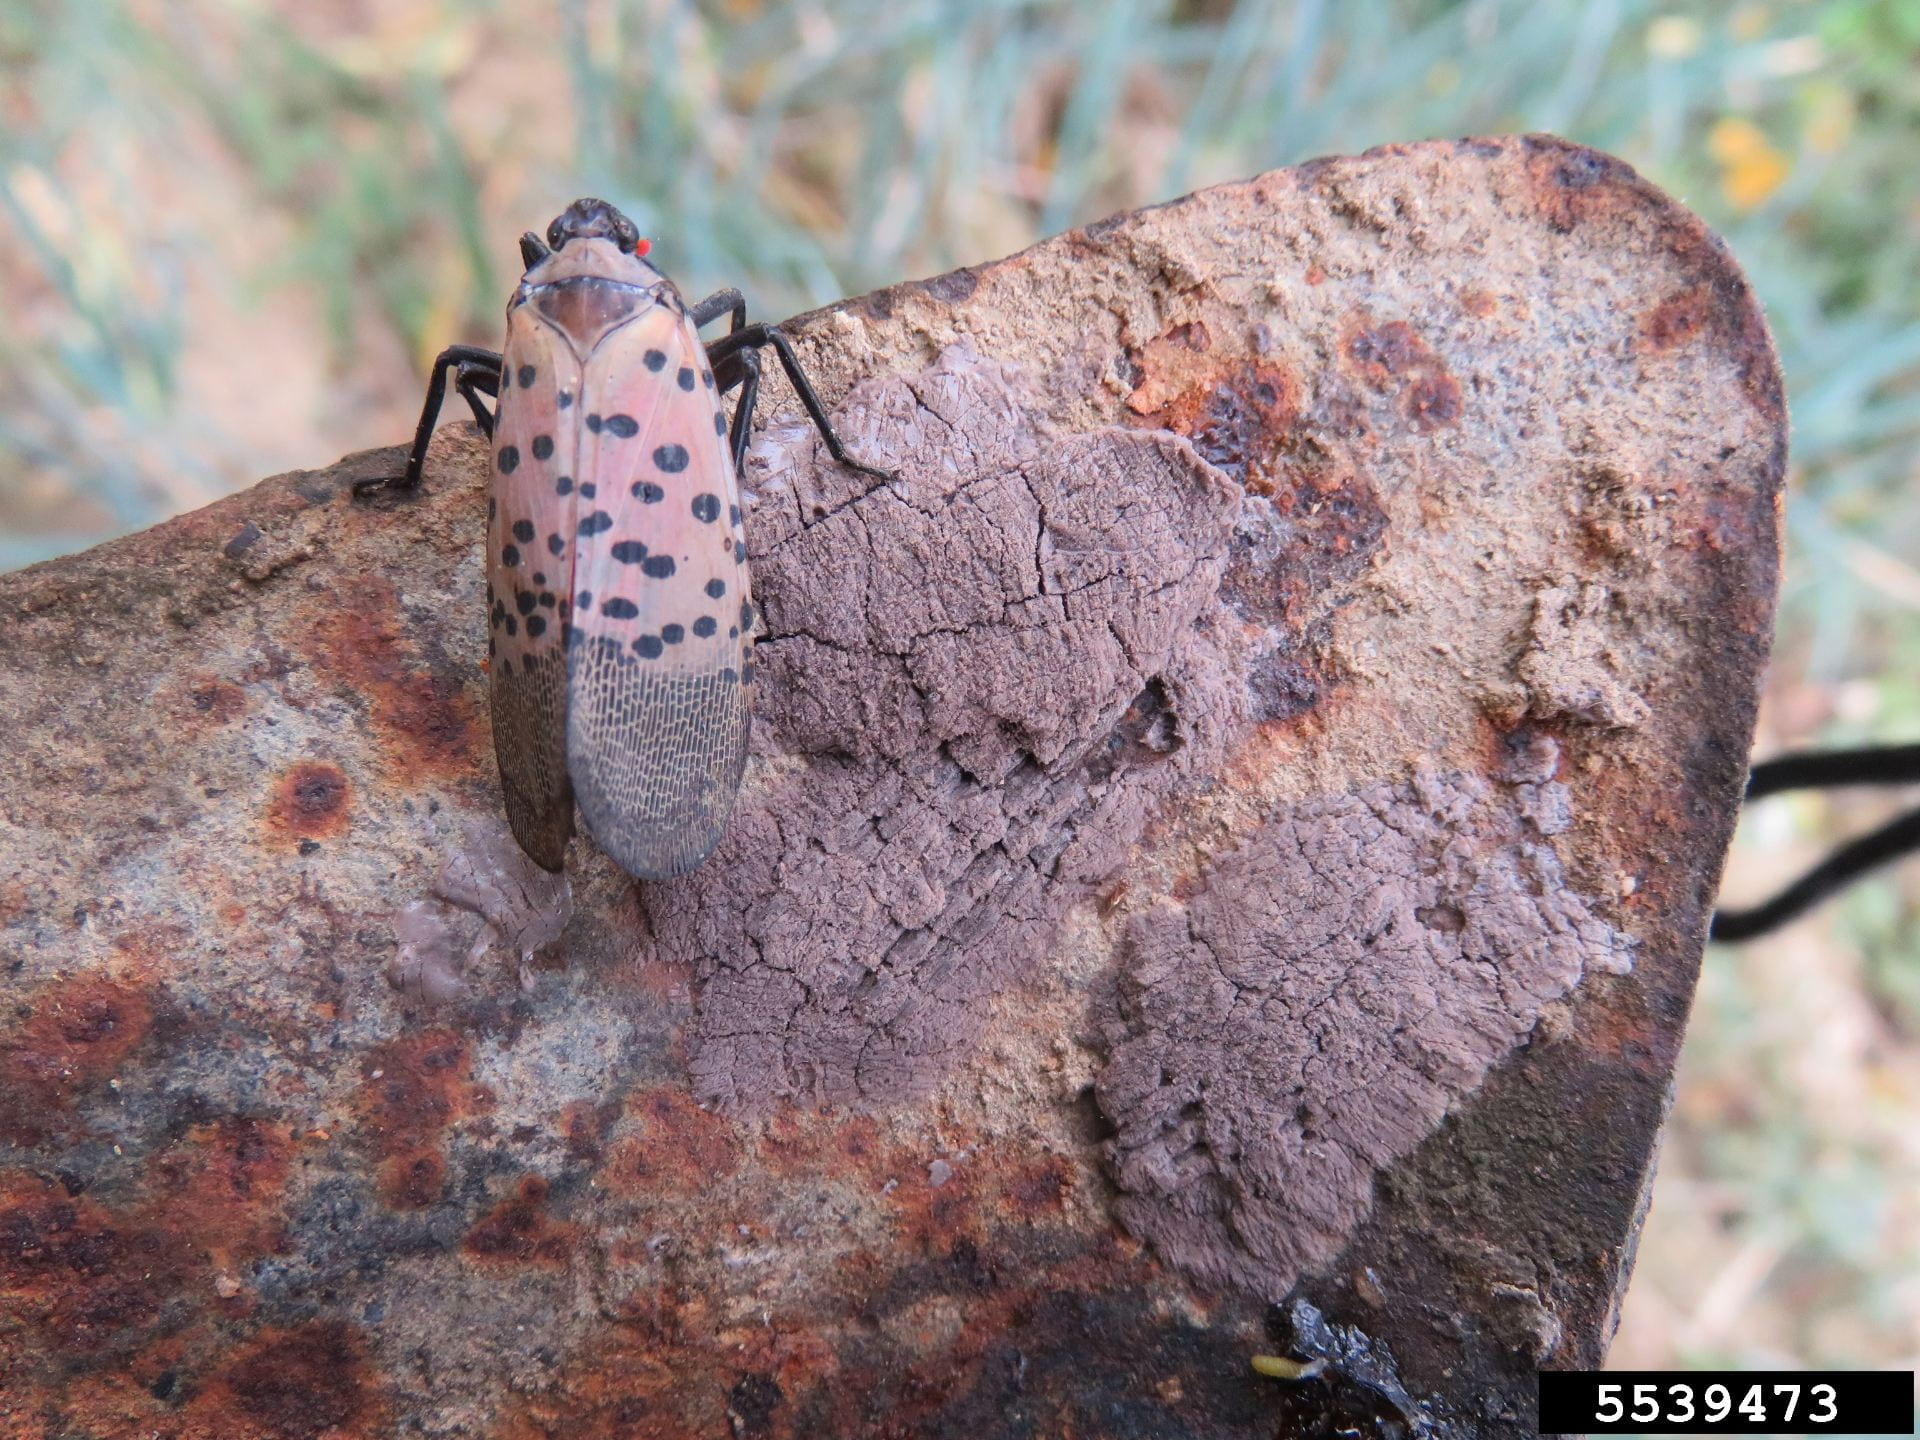 Adult spotted lanternfly with covered egg masses on rusty shovel